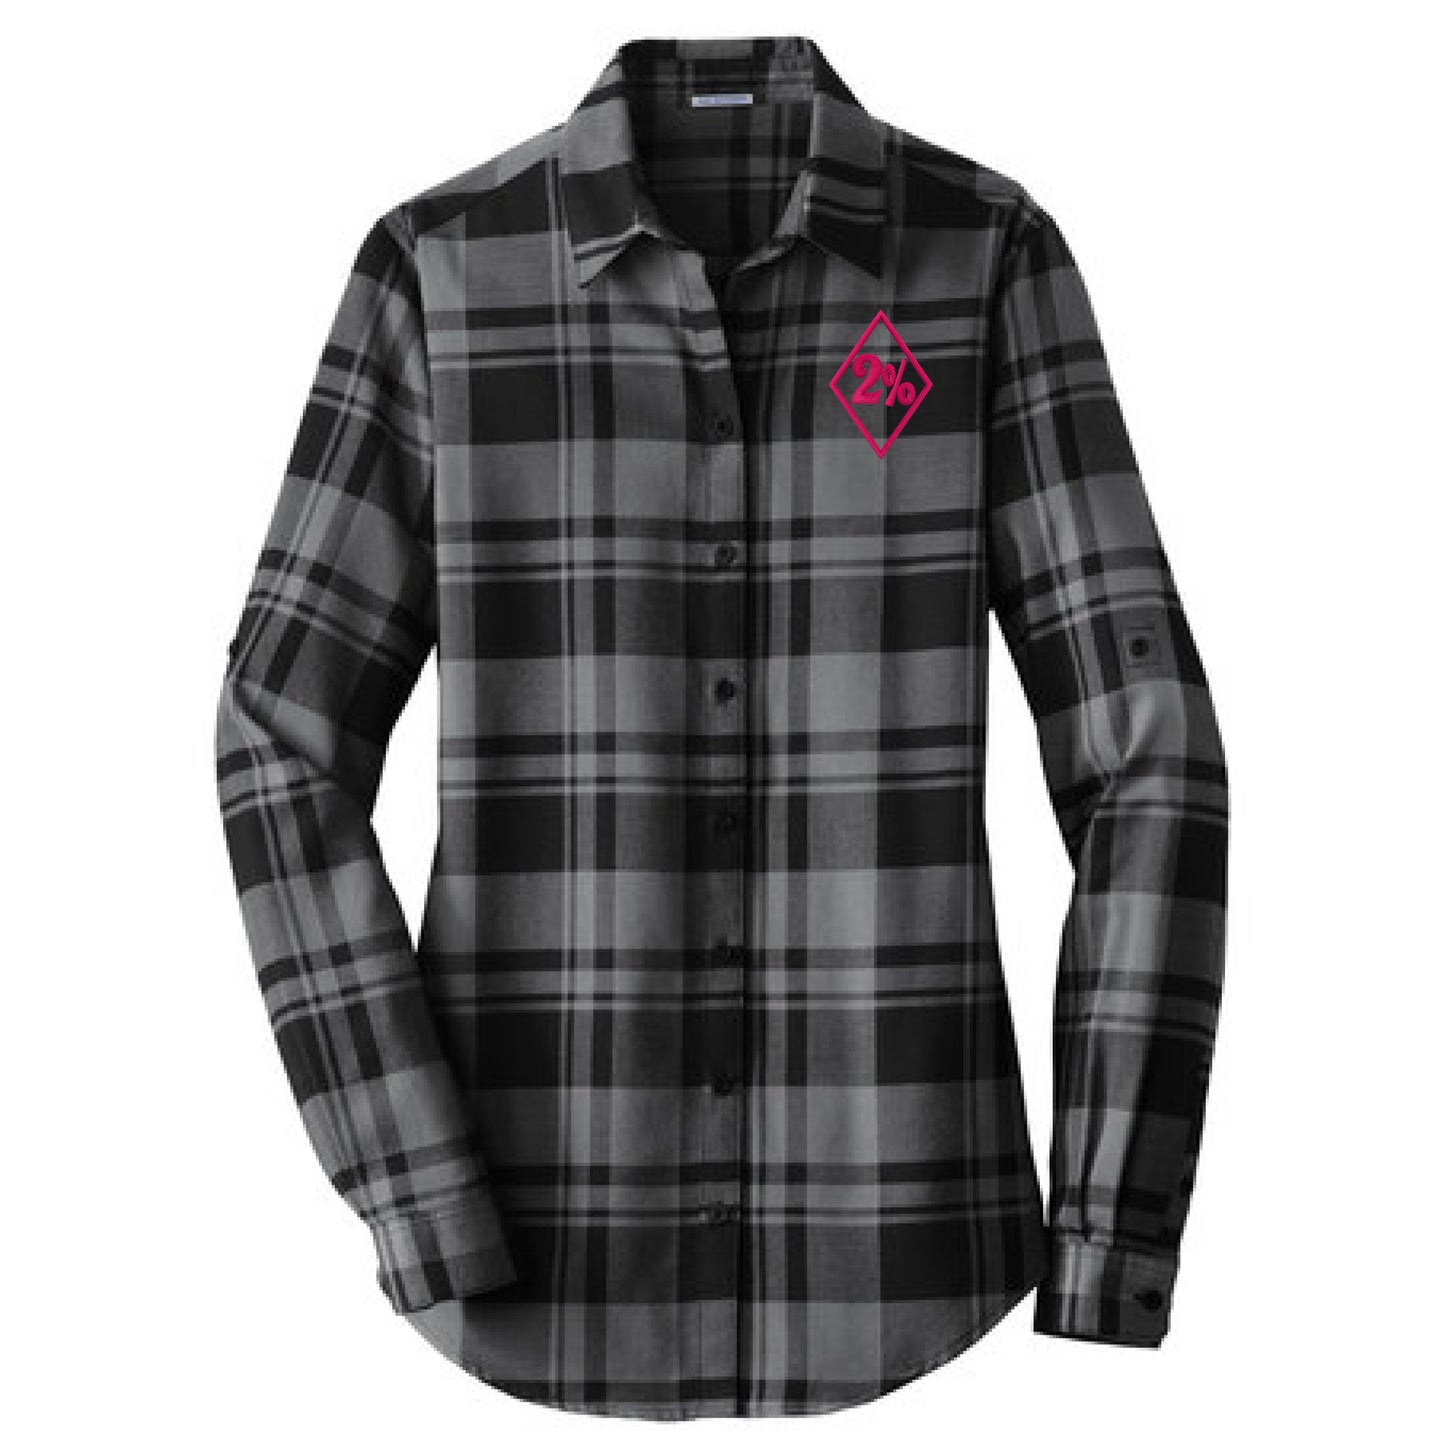 2% Embroidered Women's Flannel - Grey / Black